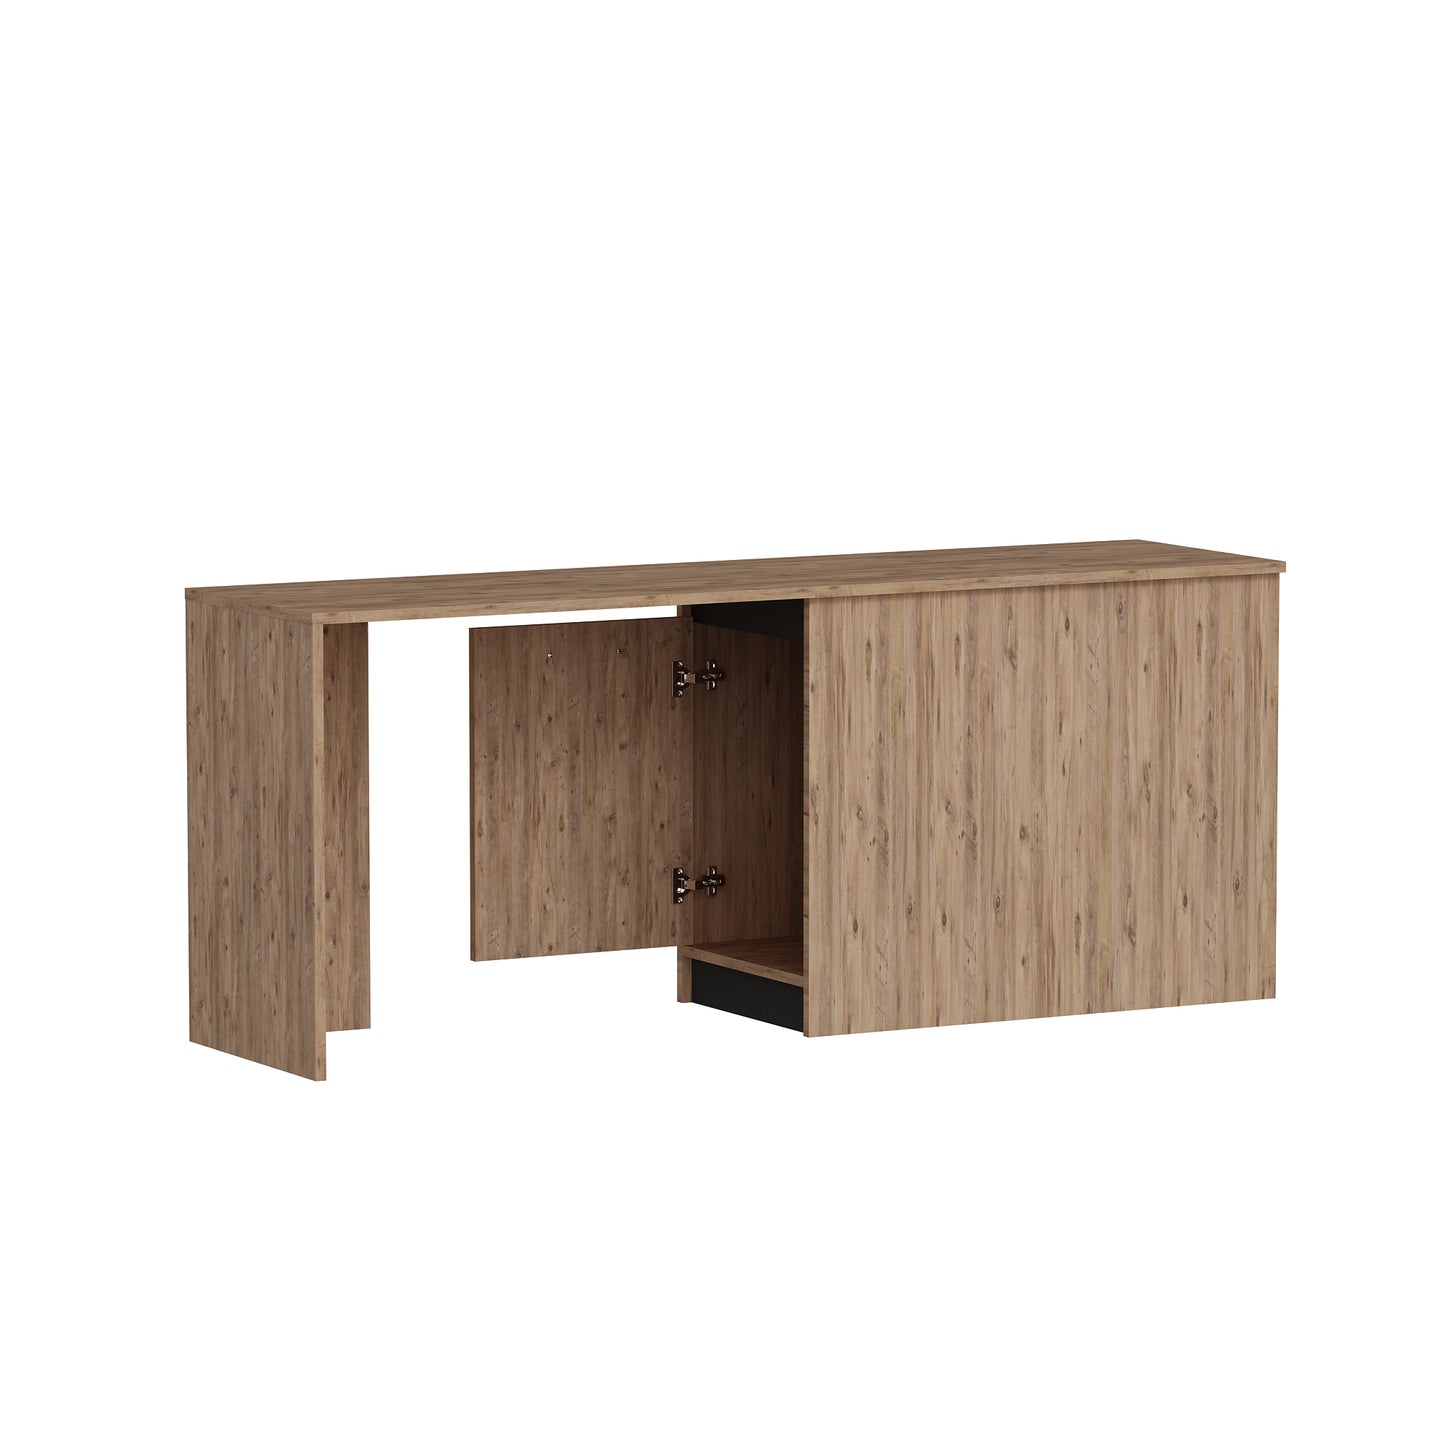 Achille Computer Desk with Cabinet